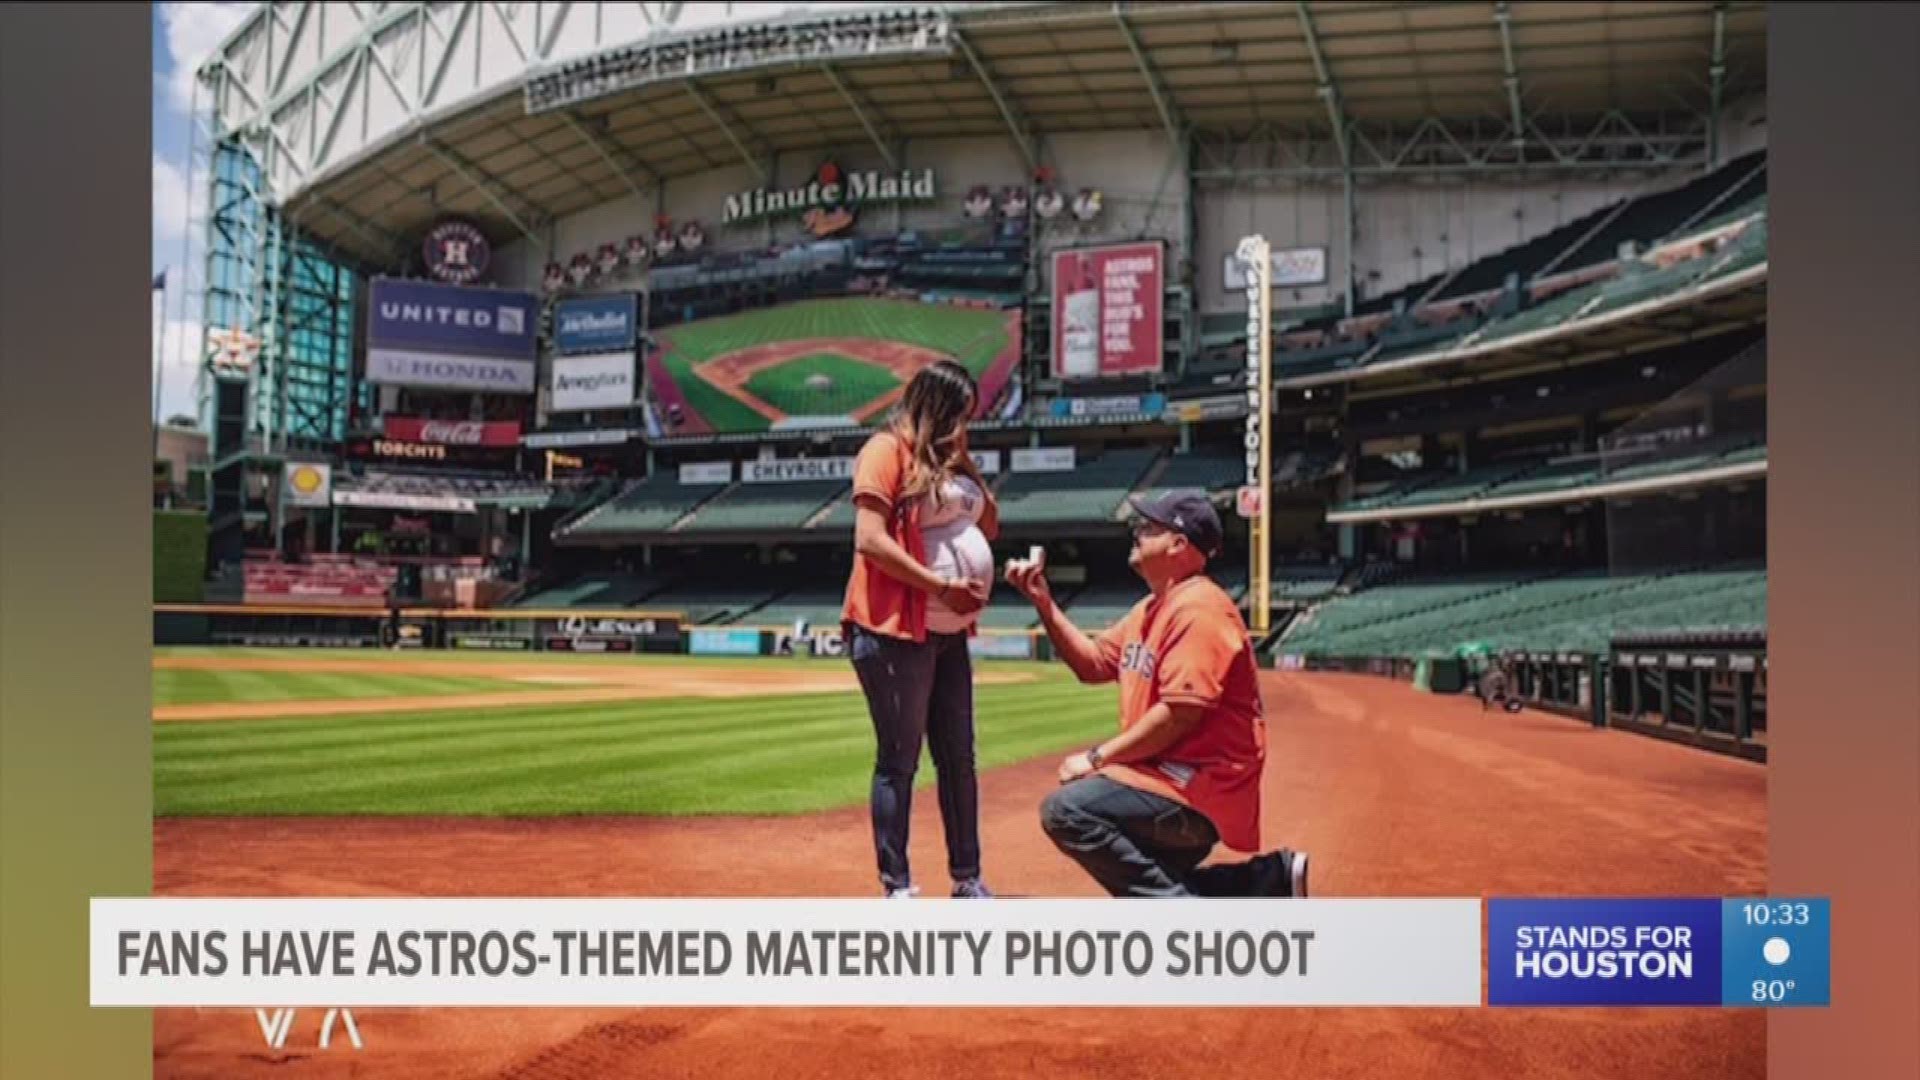 A very pregnant Astros fan got a very special surprise during her maternity photo shoot at Minute Maid Park.